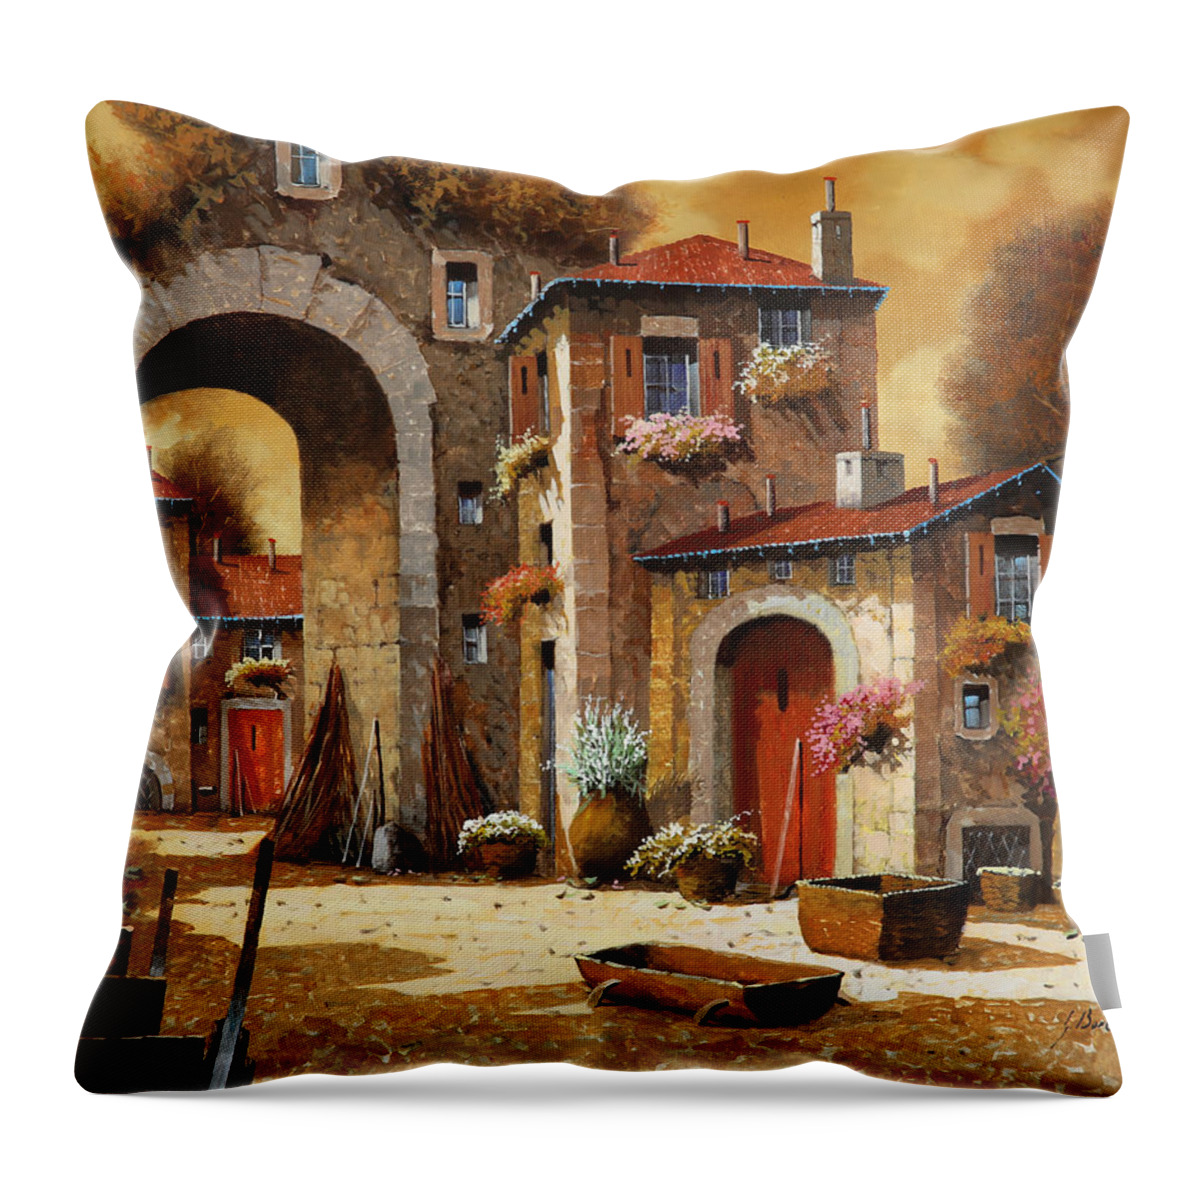 Yellow Sky Throw Pillow featuring the painting Giallo by Guido Borelli